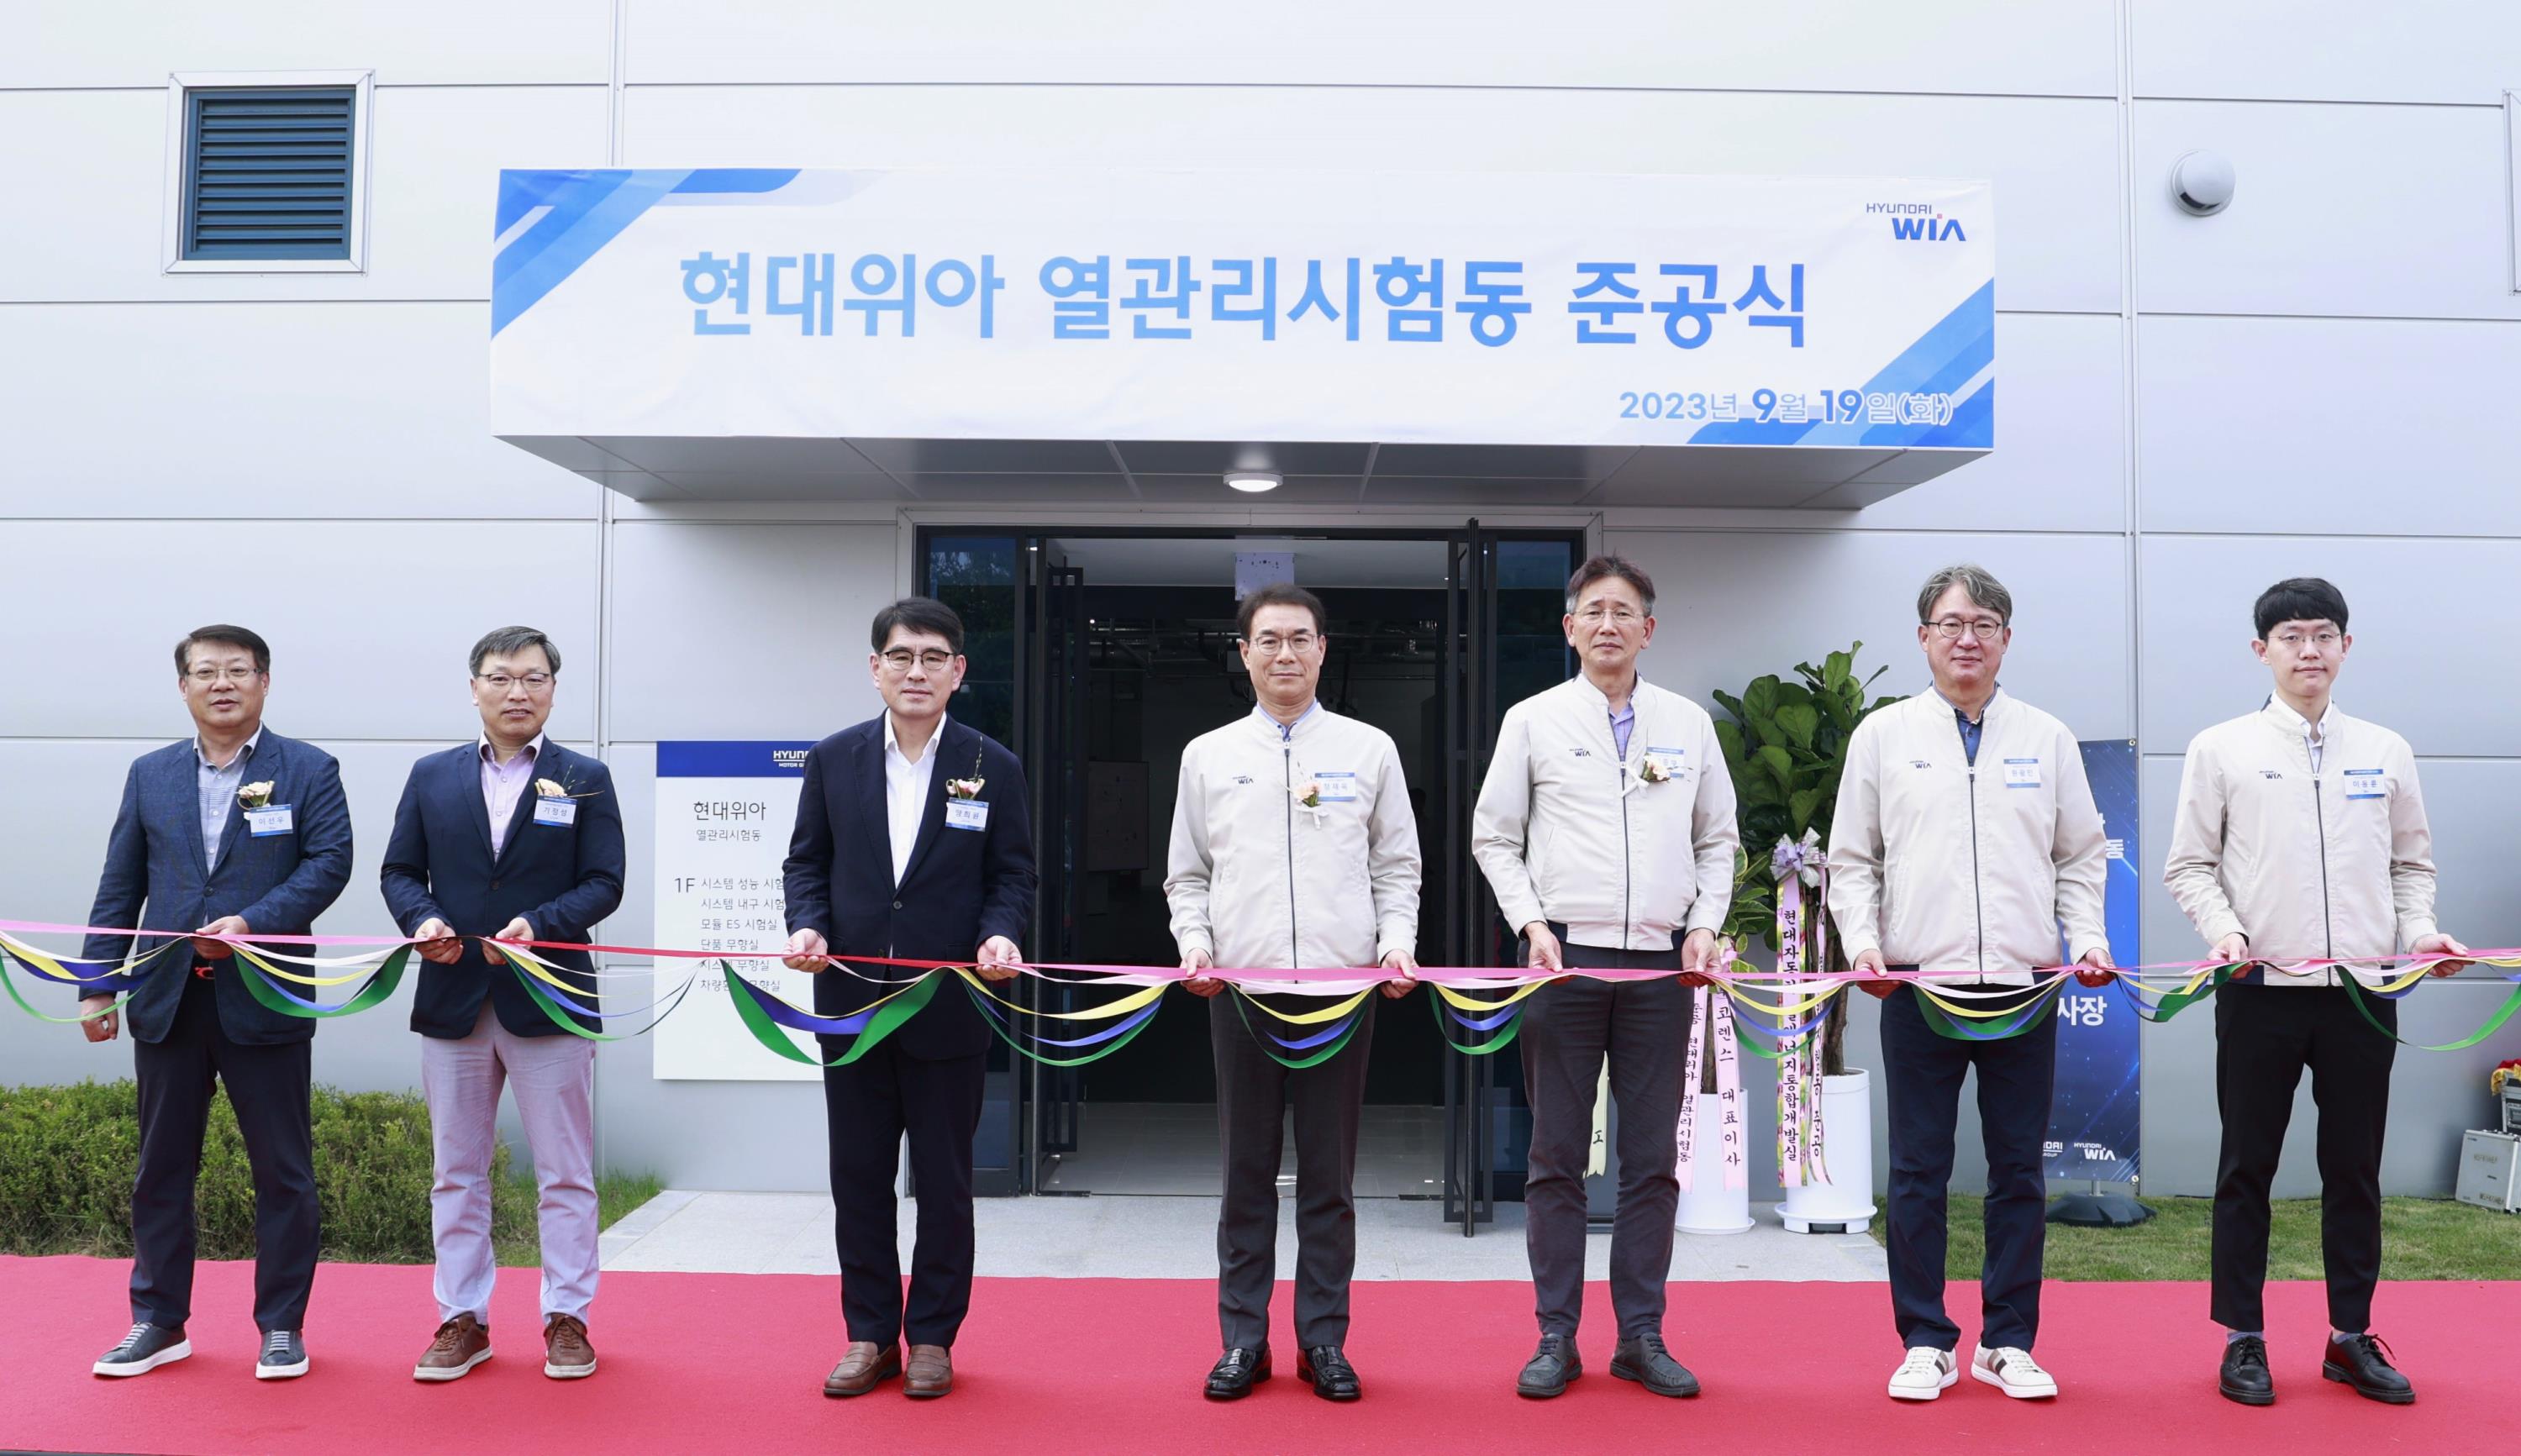 <Photo Description> Blueprint of ‘HYUNDAI WIA Thermal Management Test Center’ built-in Uiwang R&D Center in Uiwang-si, Gyeonggi-do. Courtesy of HYUNDAI WIA.